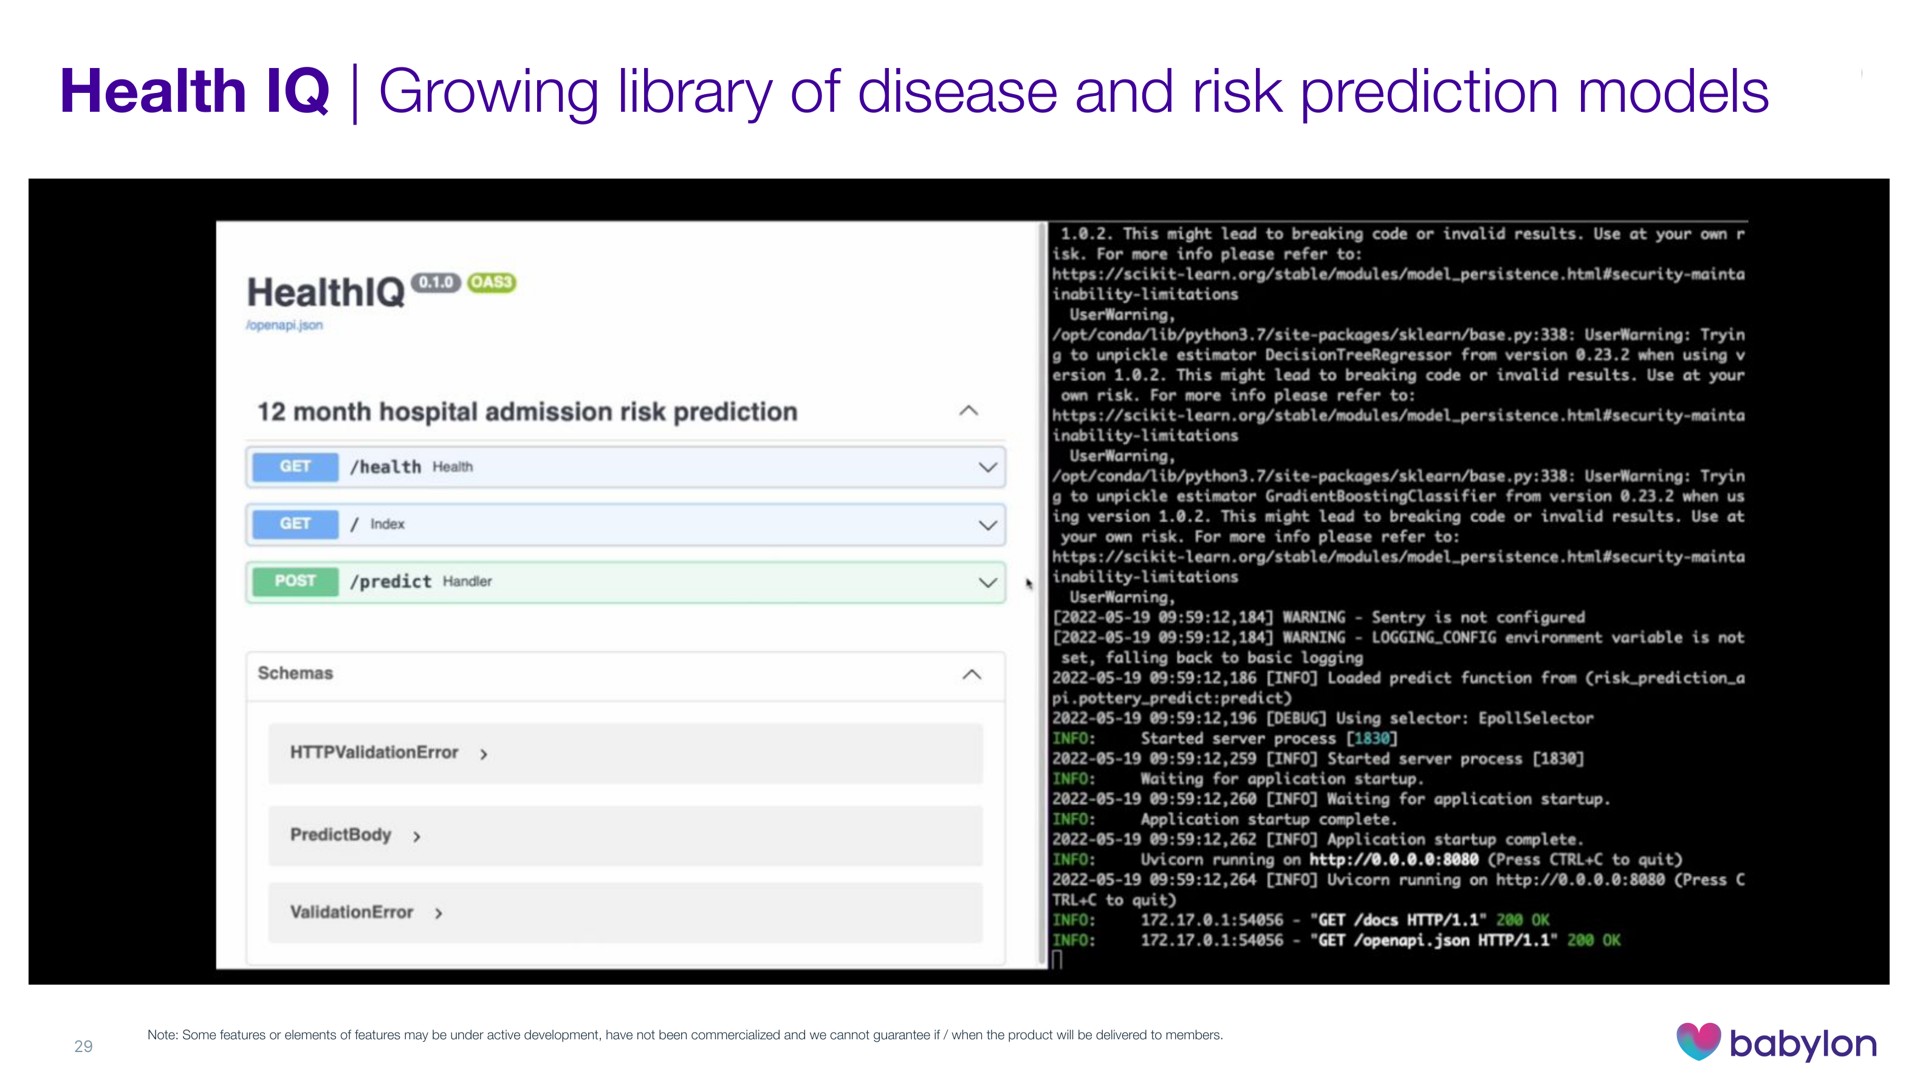 health growing library of disease and risk prediction models | Babylon